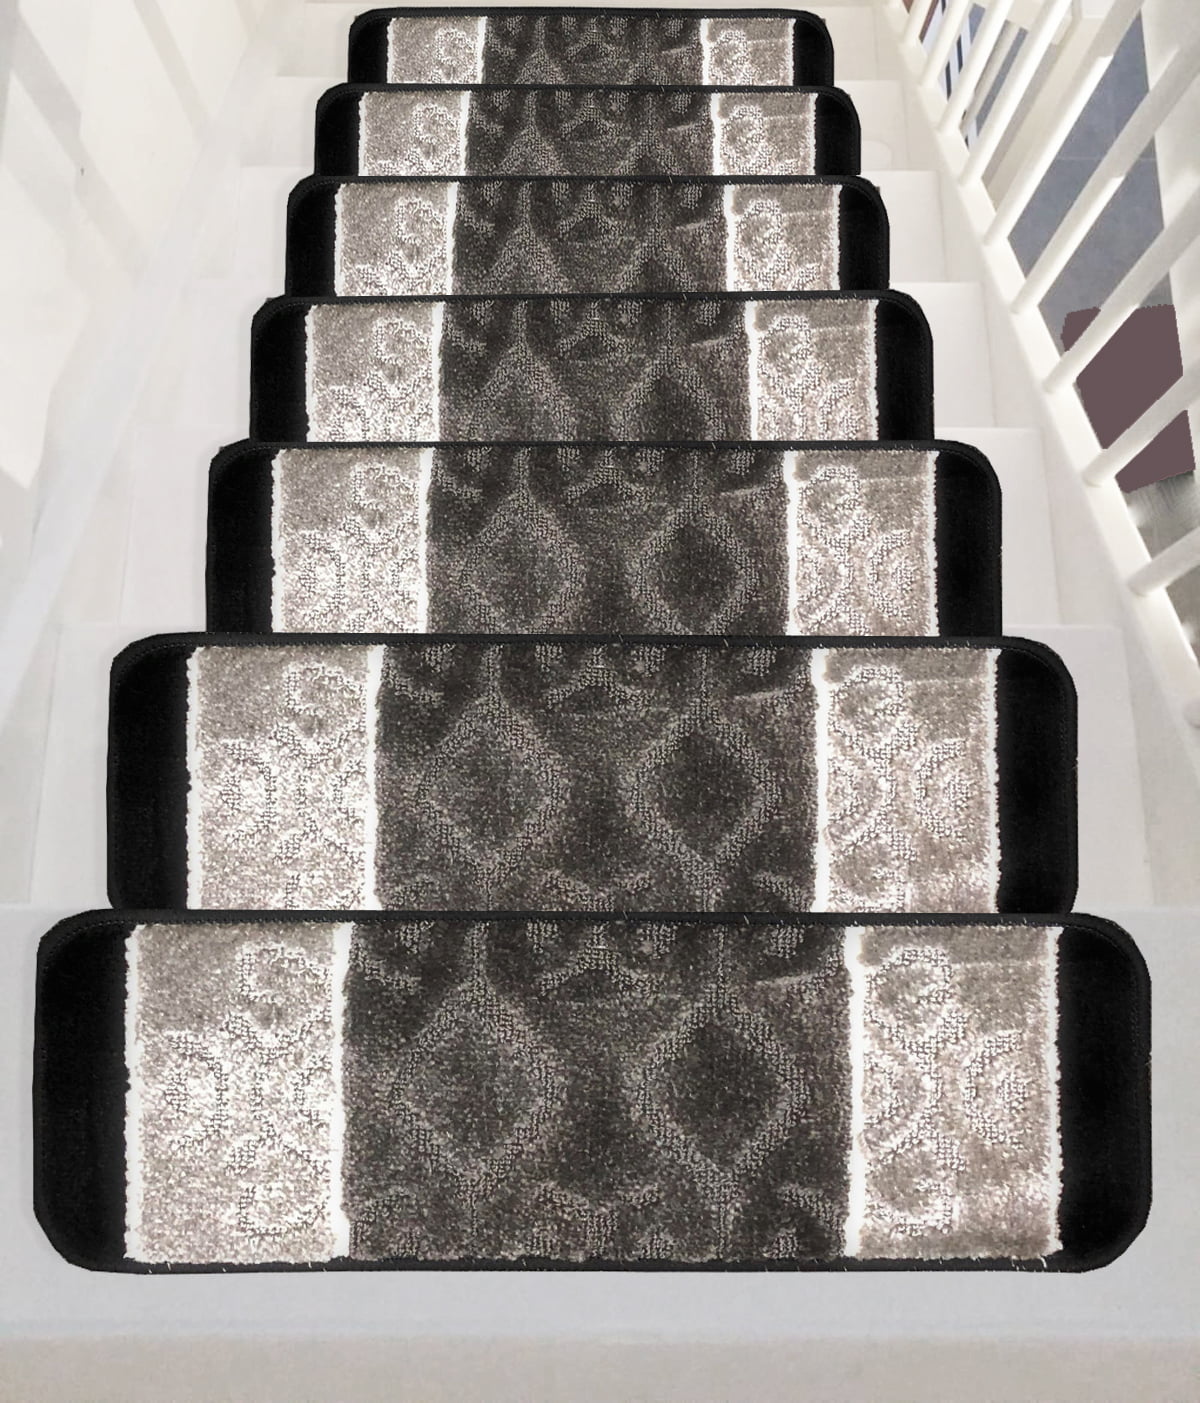 Set of 7 2202 BRW 8.5 x 26 Washable Stair Mat Area Rug Gloria Rug High Pile Skid-Resistant Rubber Backing Gripper Non-Slip Carpet Stair Treads